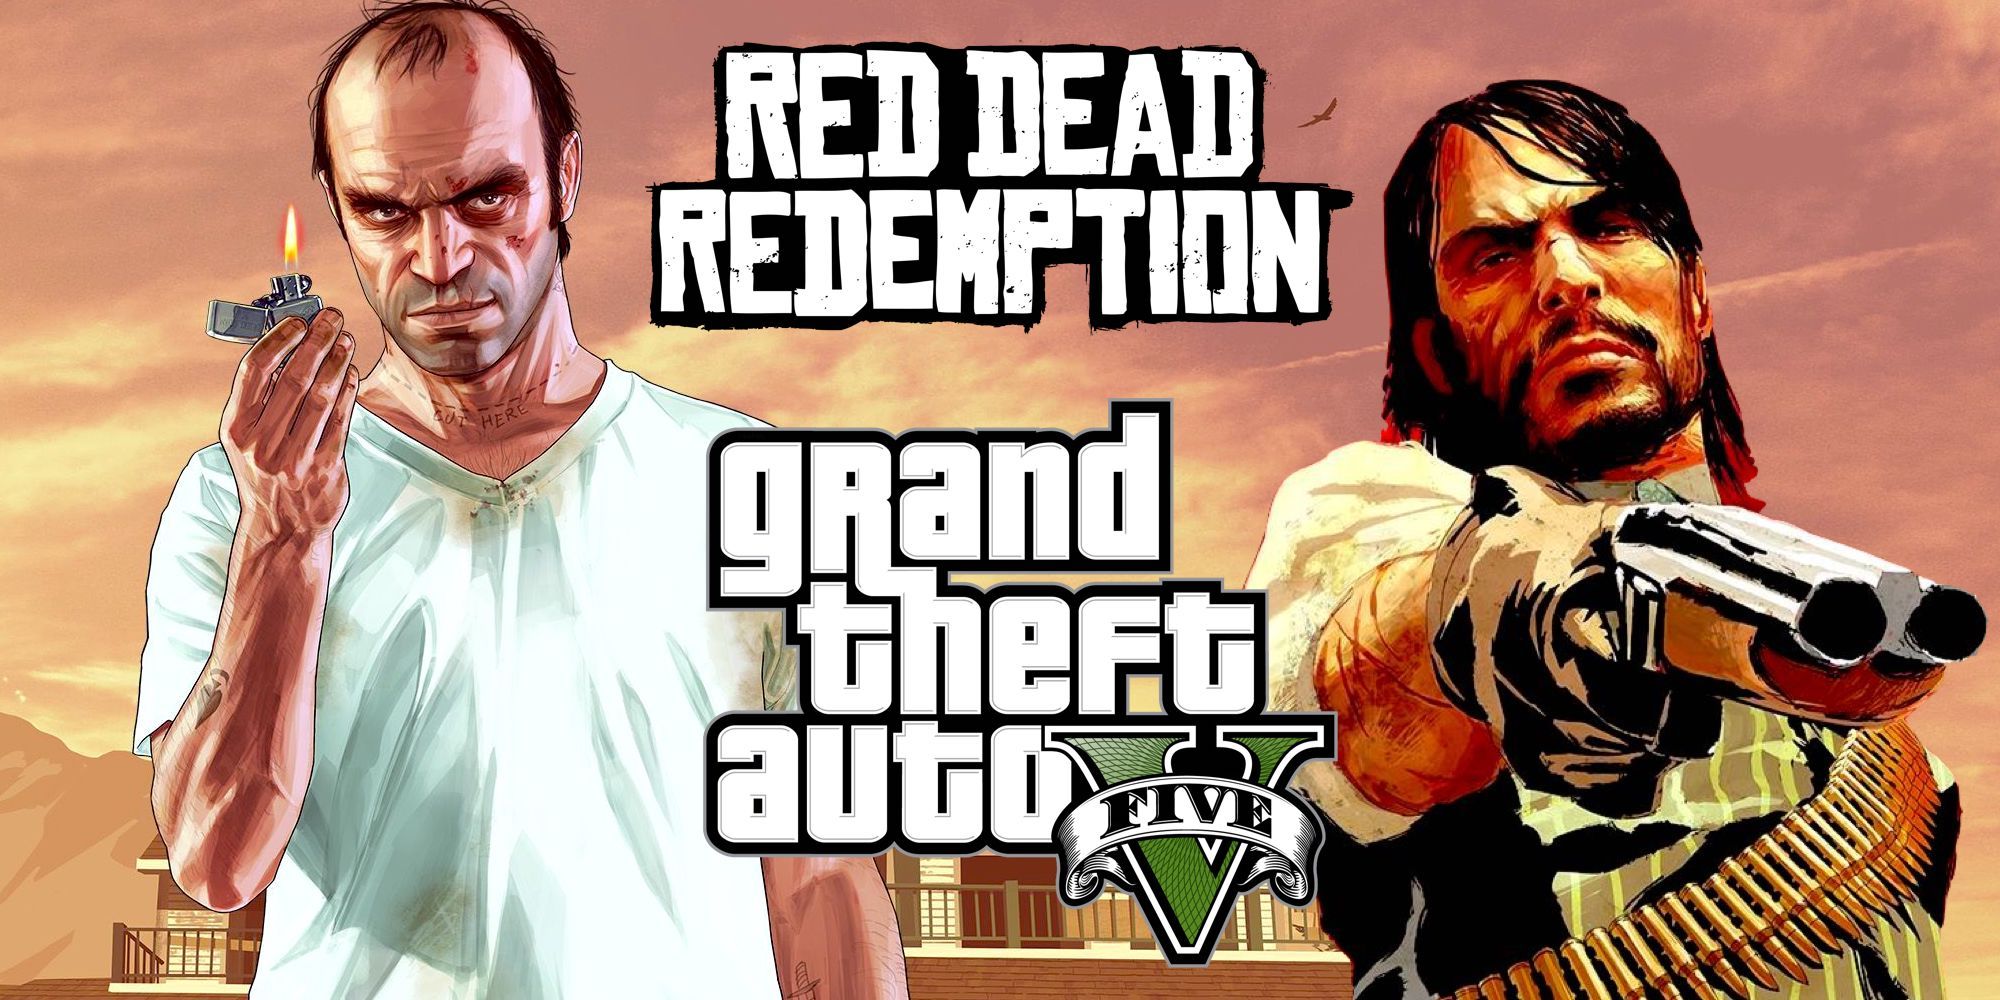 Red Dead Redemption and GTA 5's Trevor and John Marston.